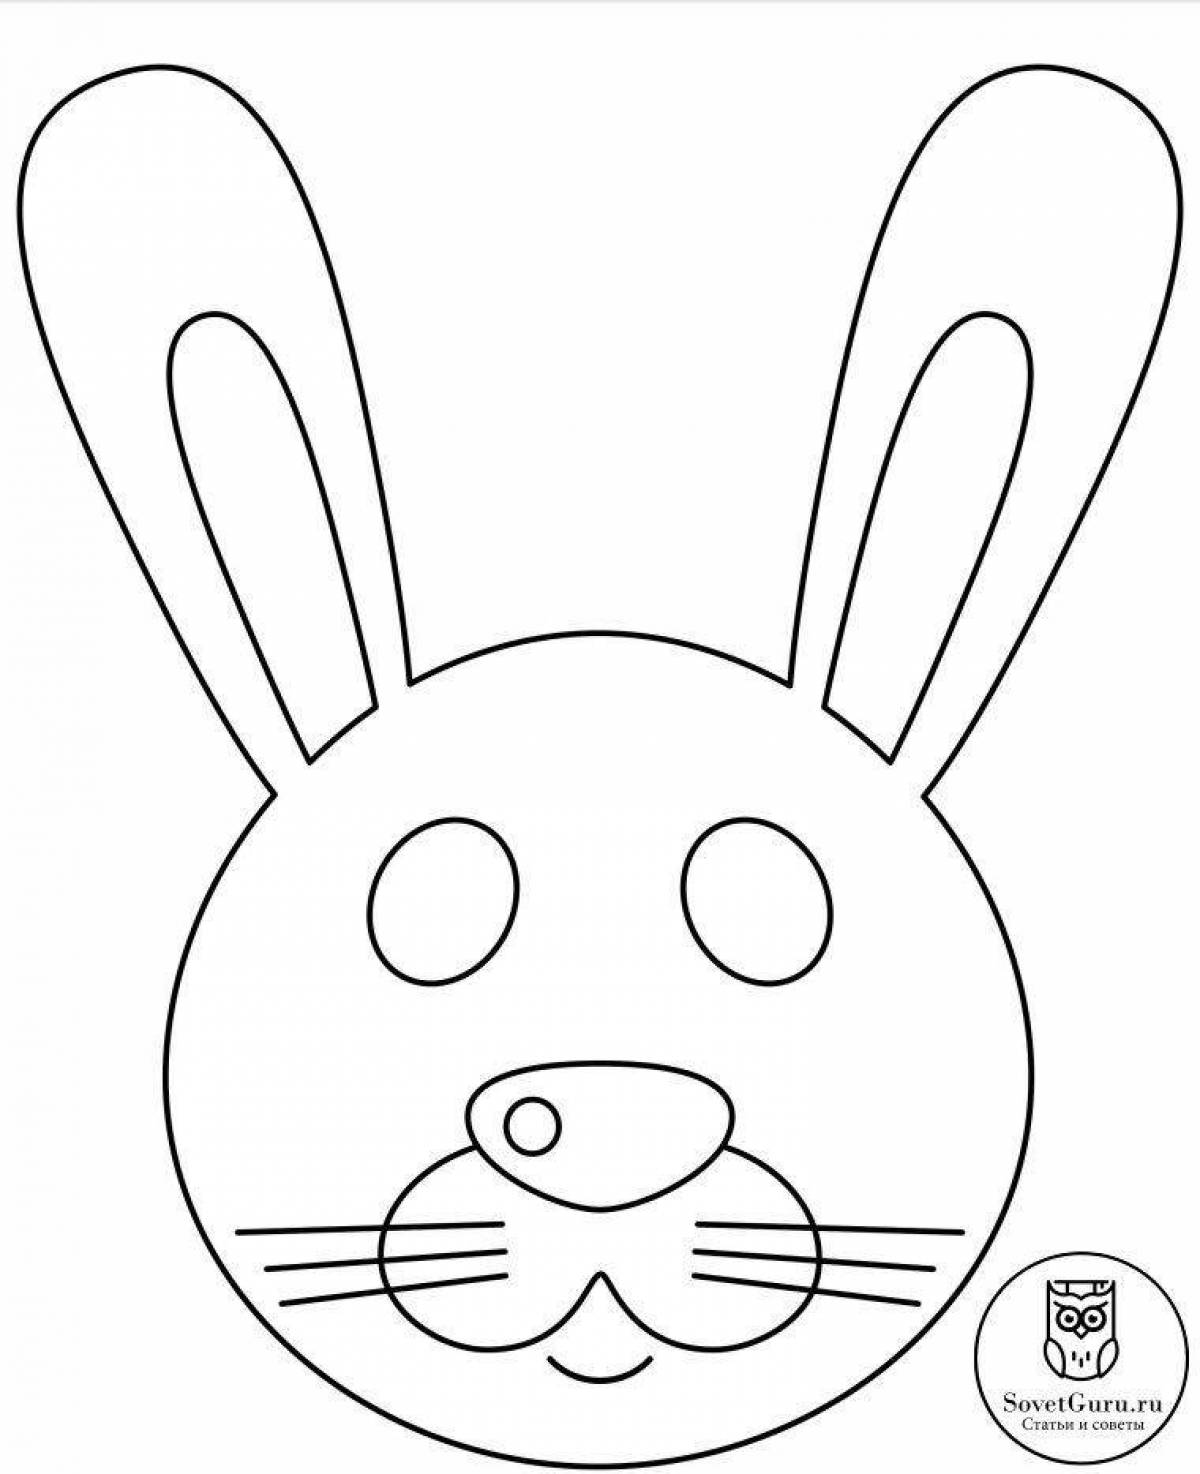 Exciting hare coloring page